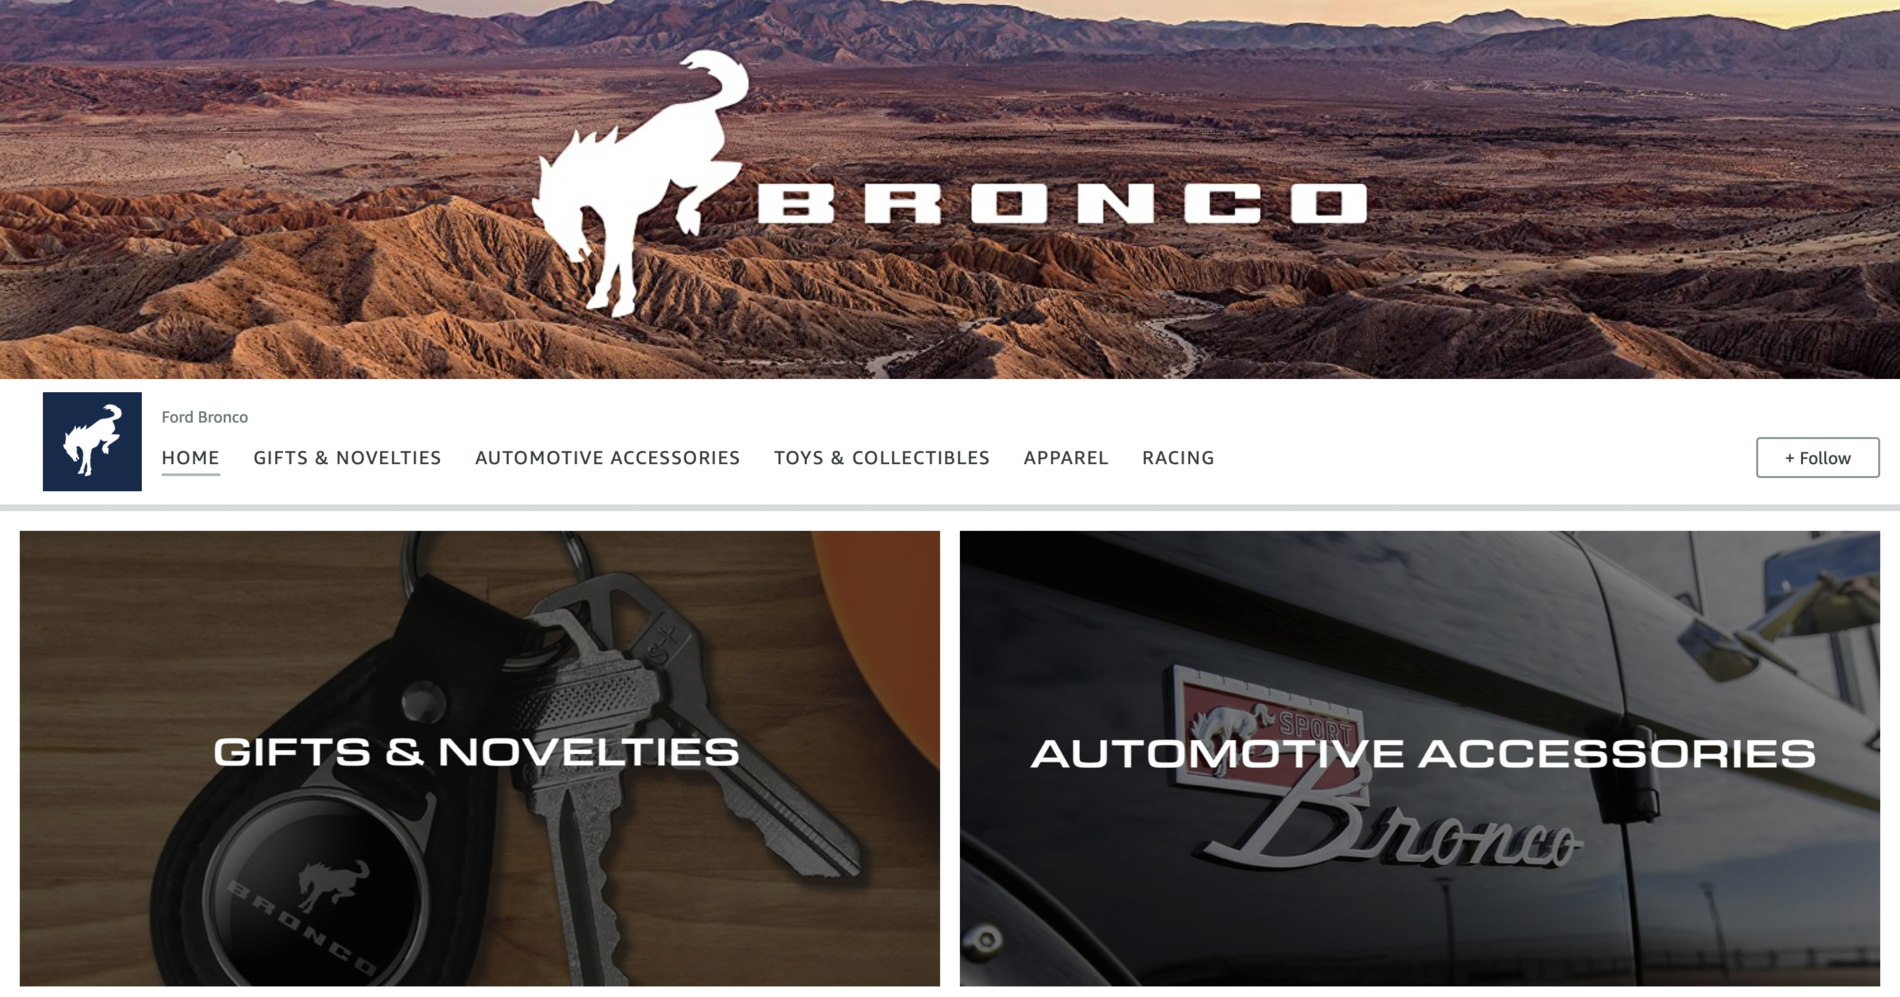 Ford Bronco Amazon page refreshed for Bronco apparel, novelties, accessories... Screen Shot 2021-03-29 at 3.11.43 PM